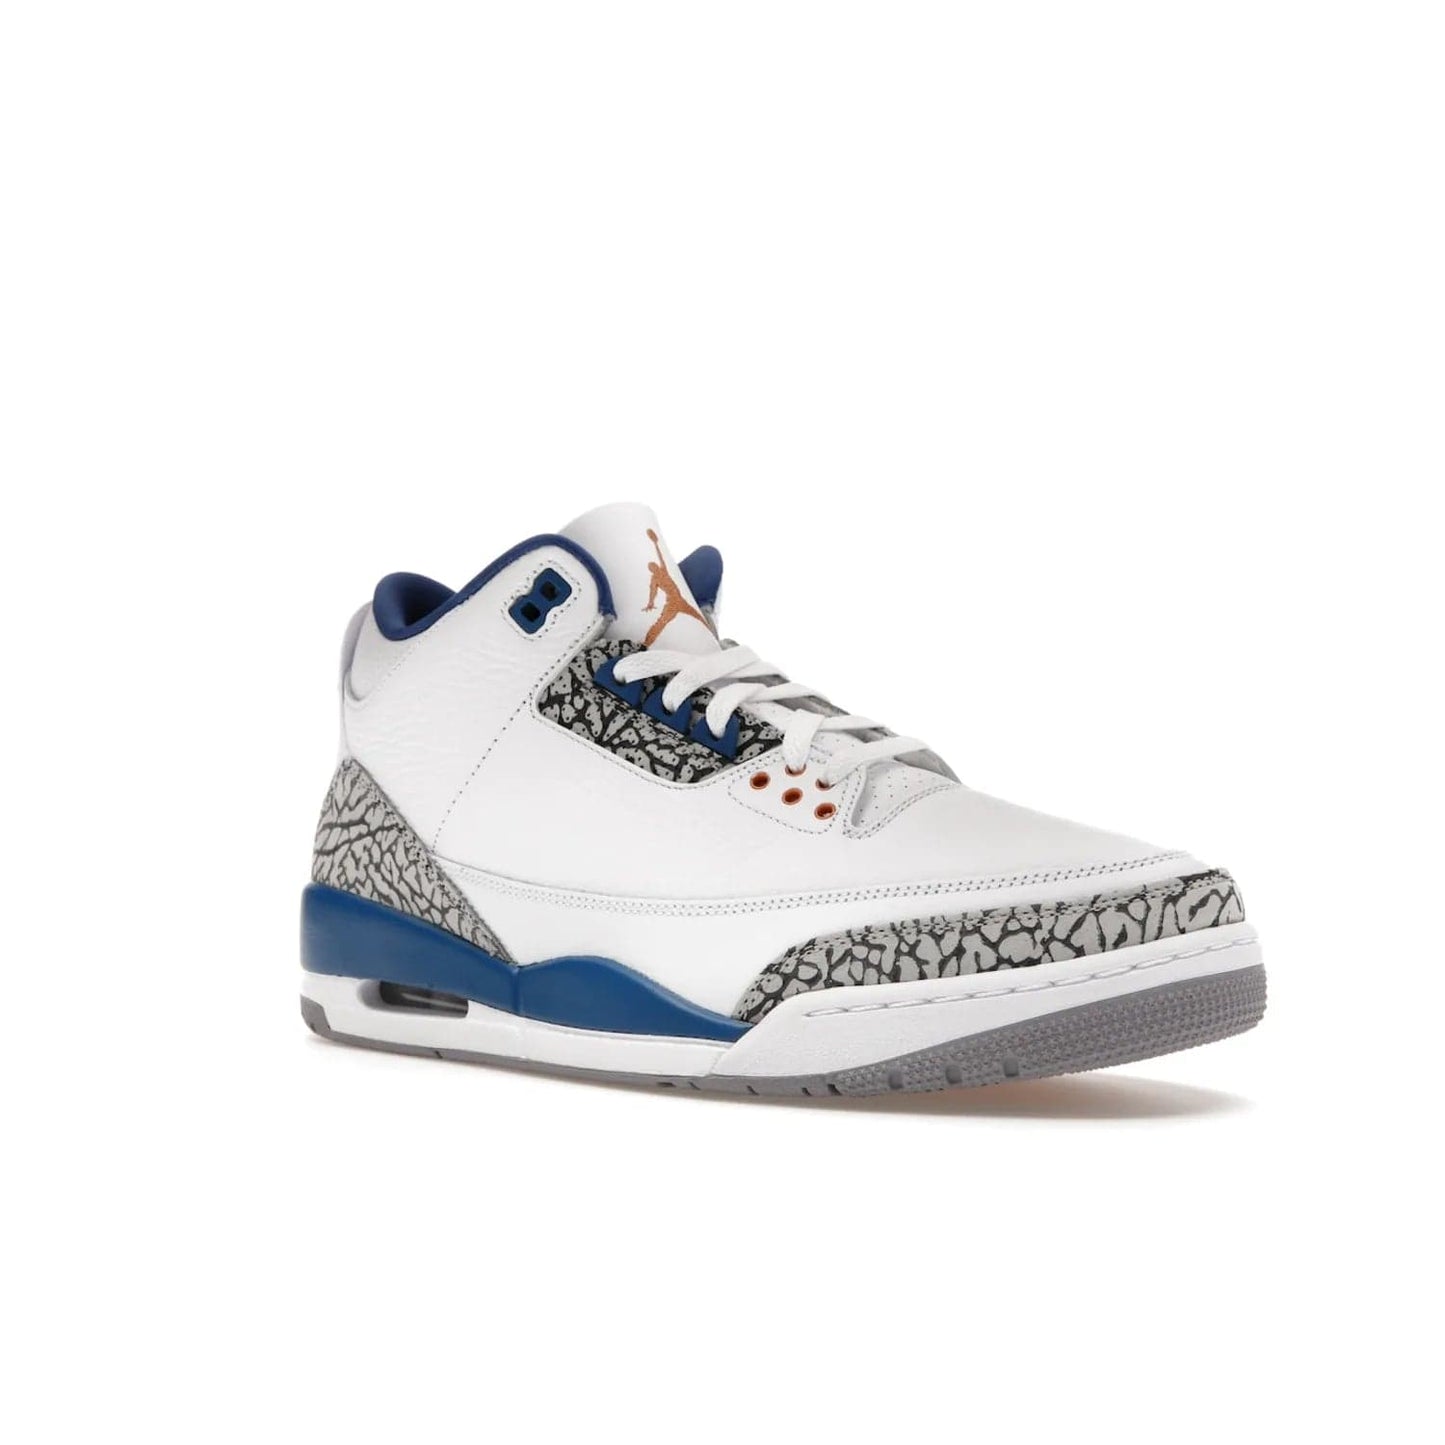 Jordan 3 Retro Wizards - Image 5 - Only at www.BallersClubKickz.com - ##
Special tribute sneaker from Jordan Brand to Michael Jordan's time with the Washington Wizards. Iconic white upper, orange Jumpman logo, blue accents, metallic copper details, and cement grey outsole. Buy the Air Jordan 3 Retro Wizards April 29, 2023.